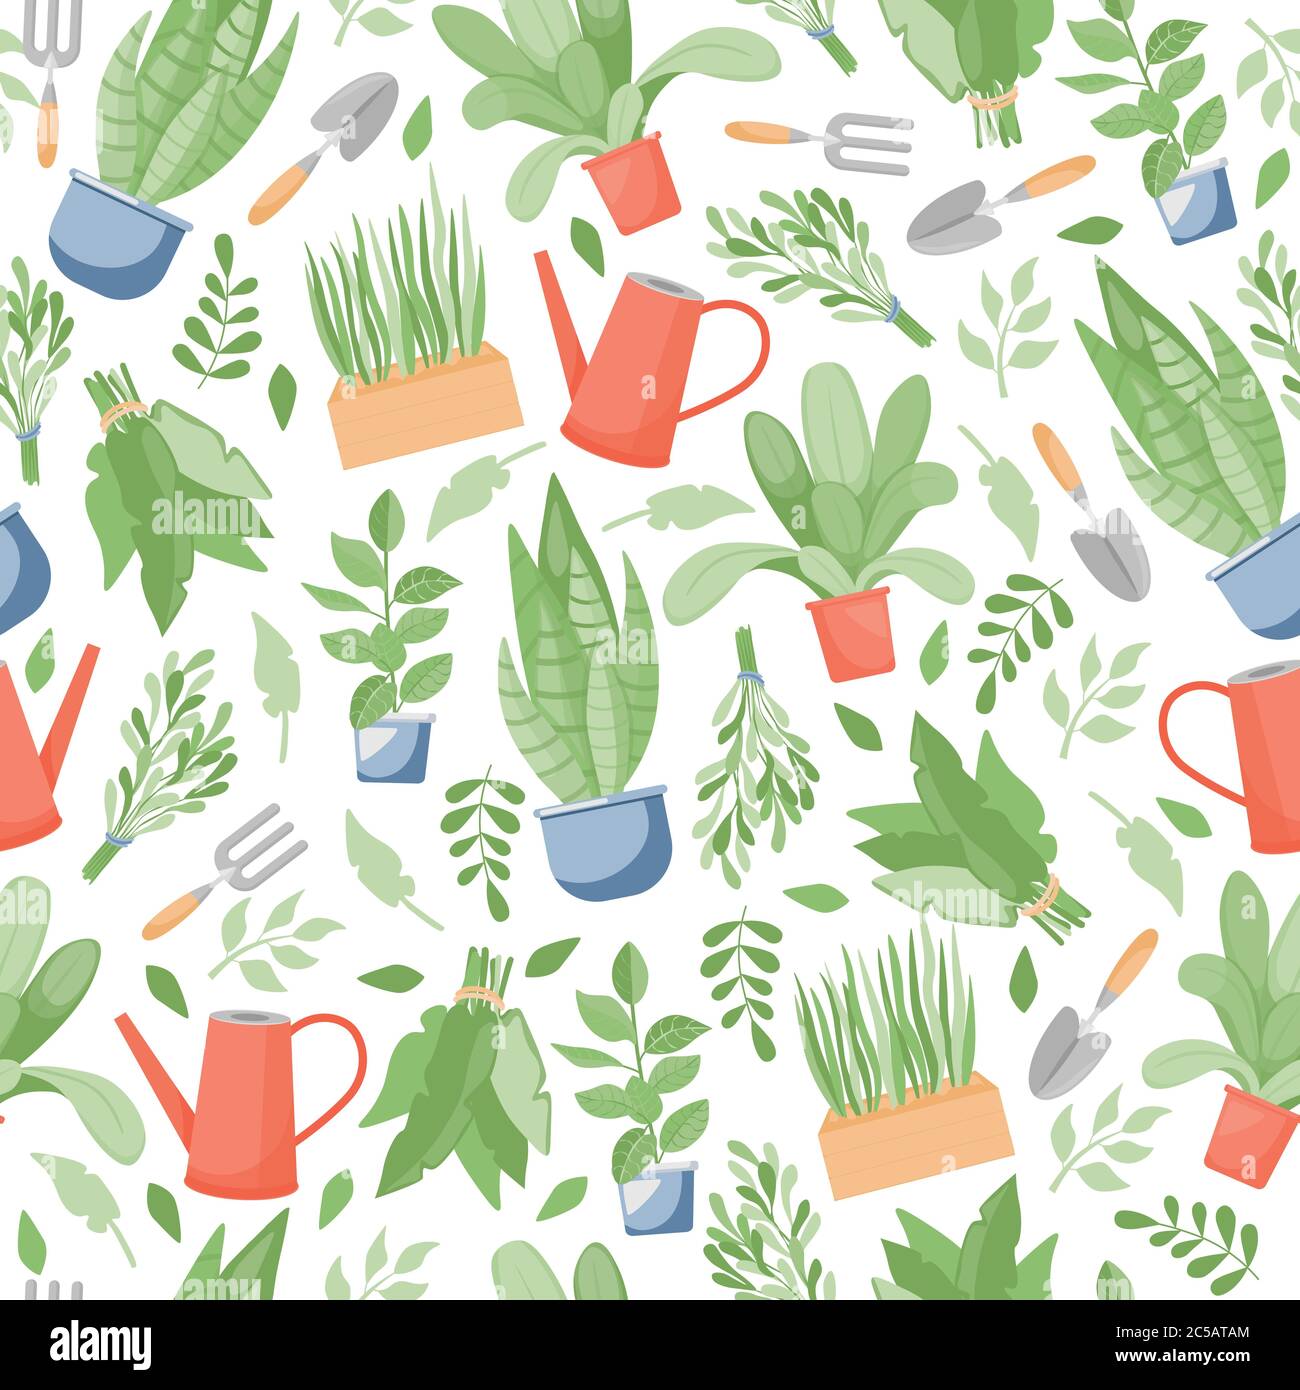 Gardening and farming seamless pattern. Green plants in pots, garden tools, watering can, and leaves vector flat illustration. Ecological, agriculture gardener hobby and garden job backdrop design. Stock Vector